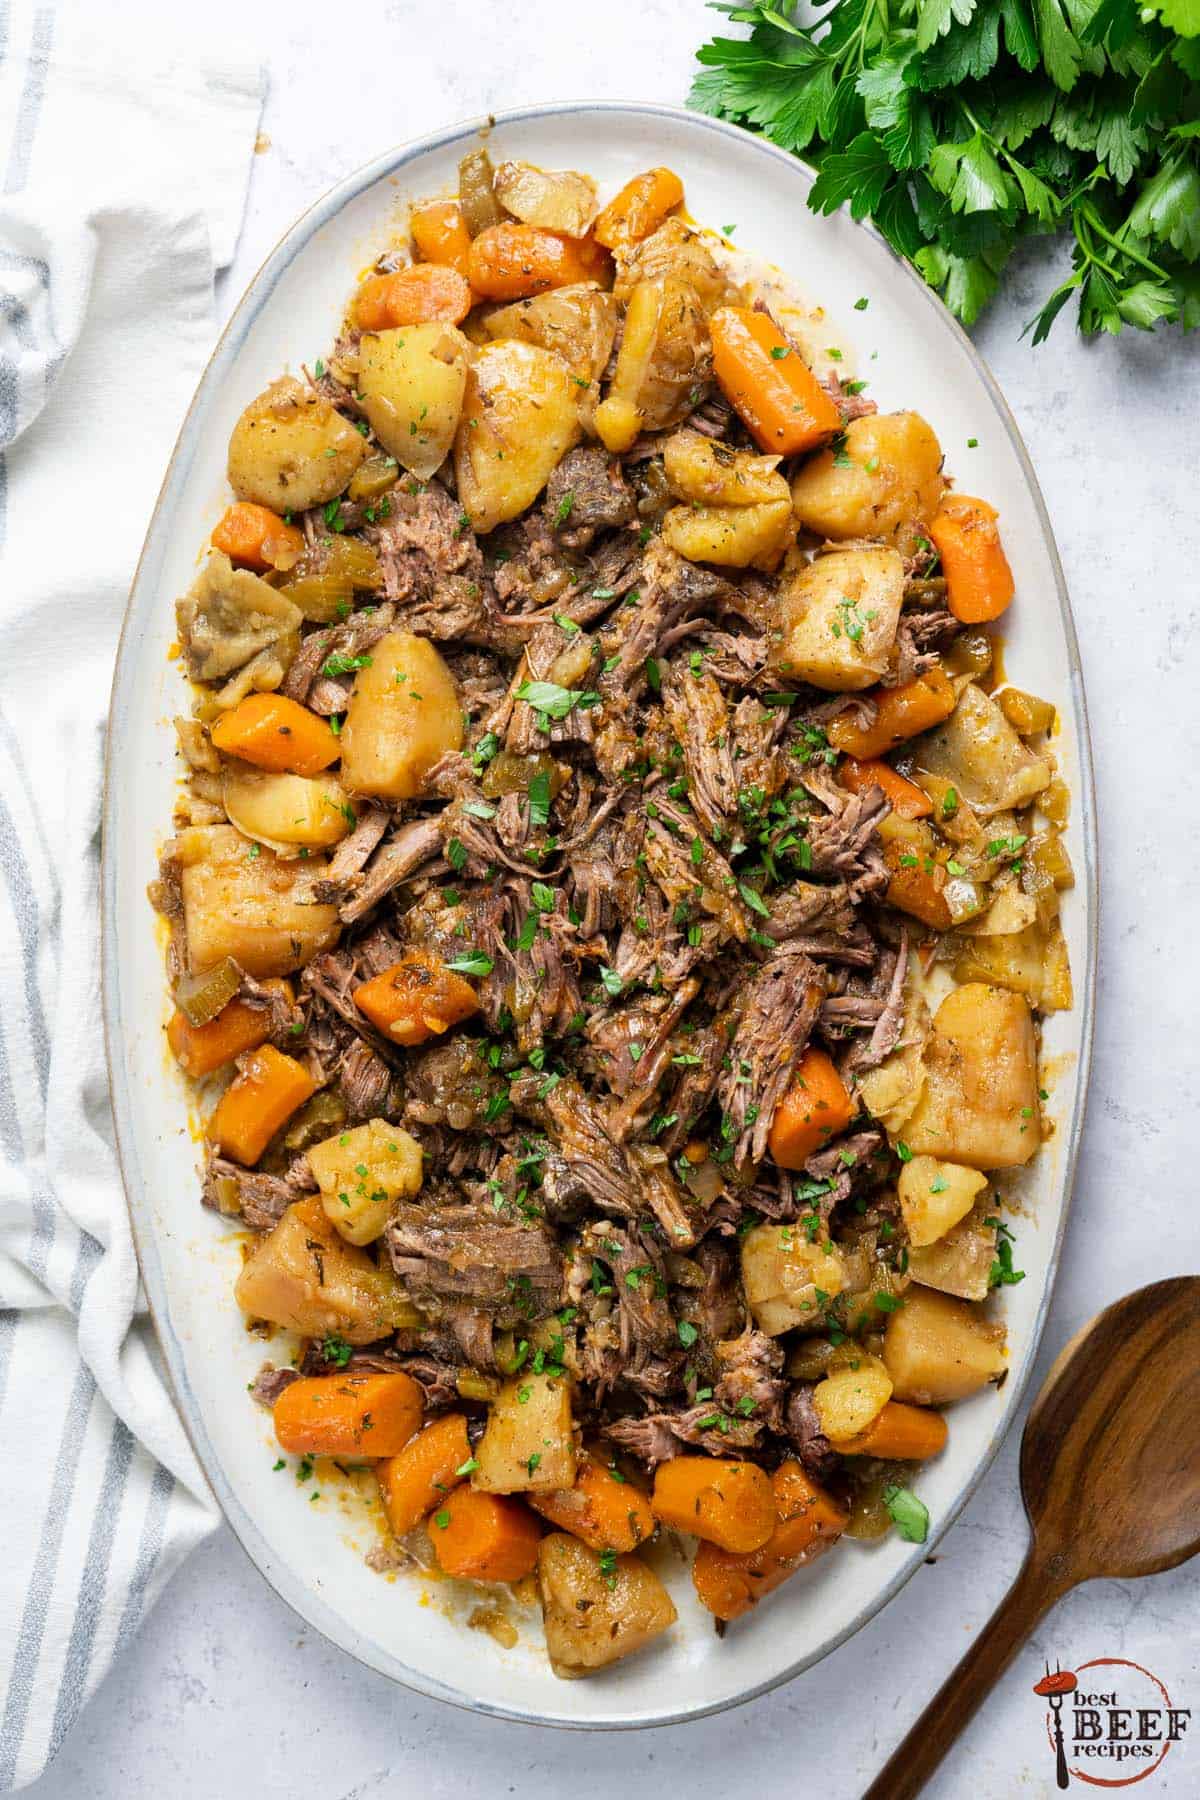 shredded slow cooker roast beef on a platter with carrots and potatoes